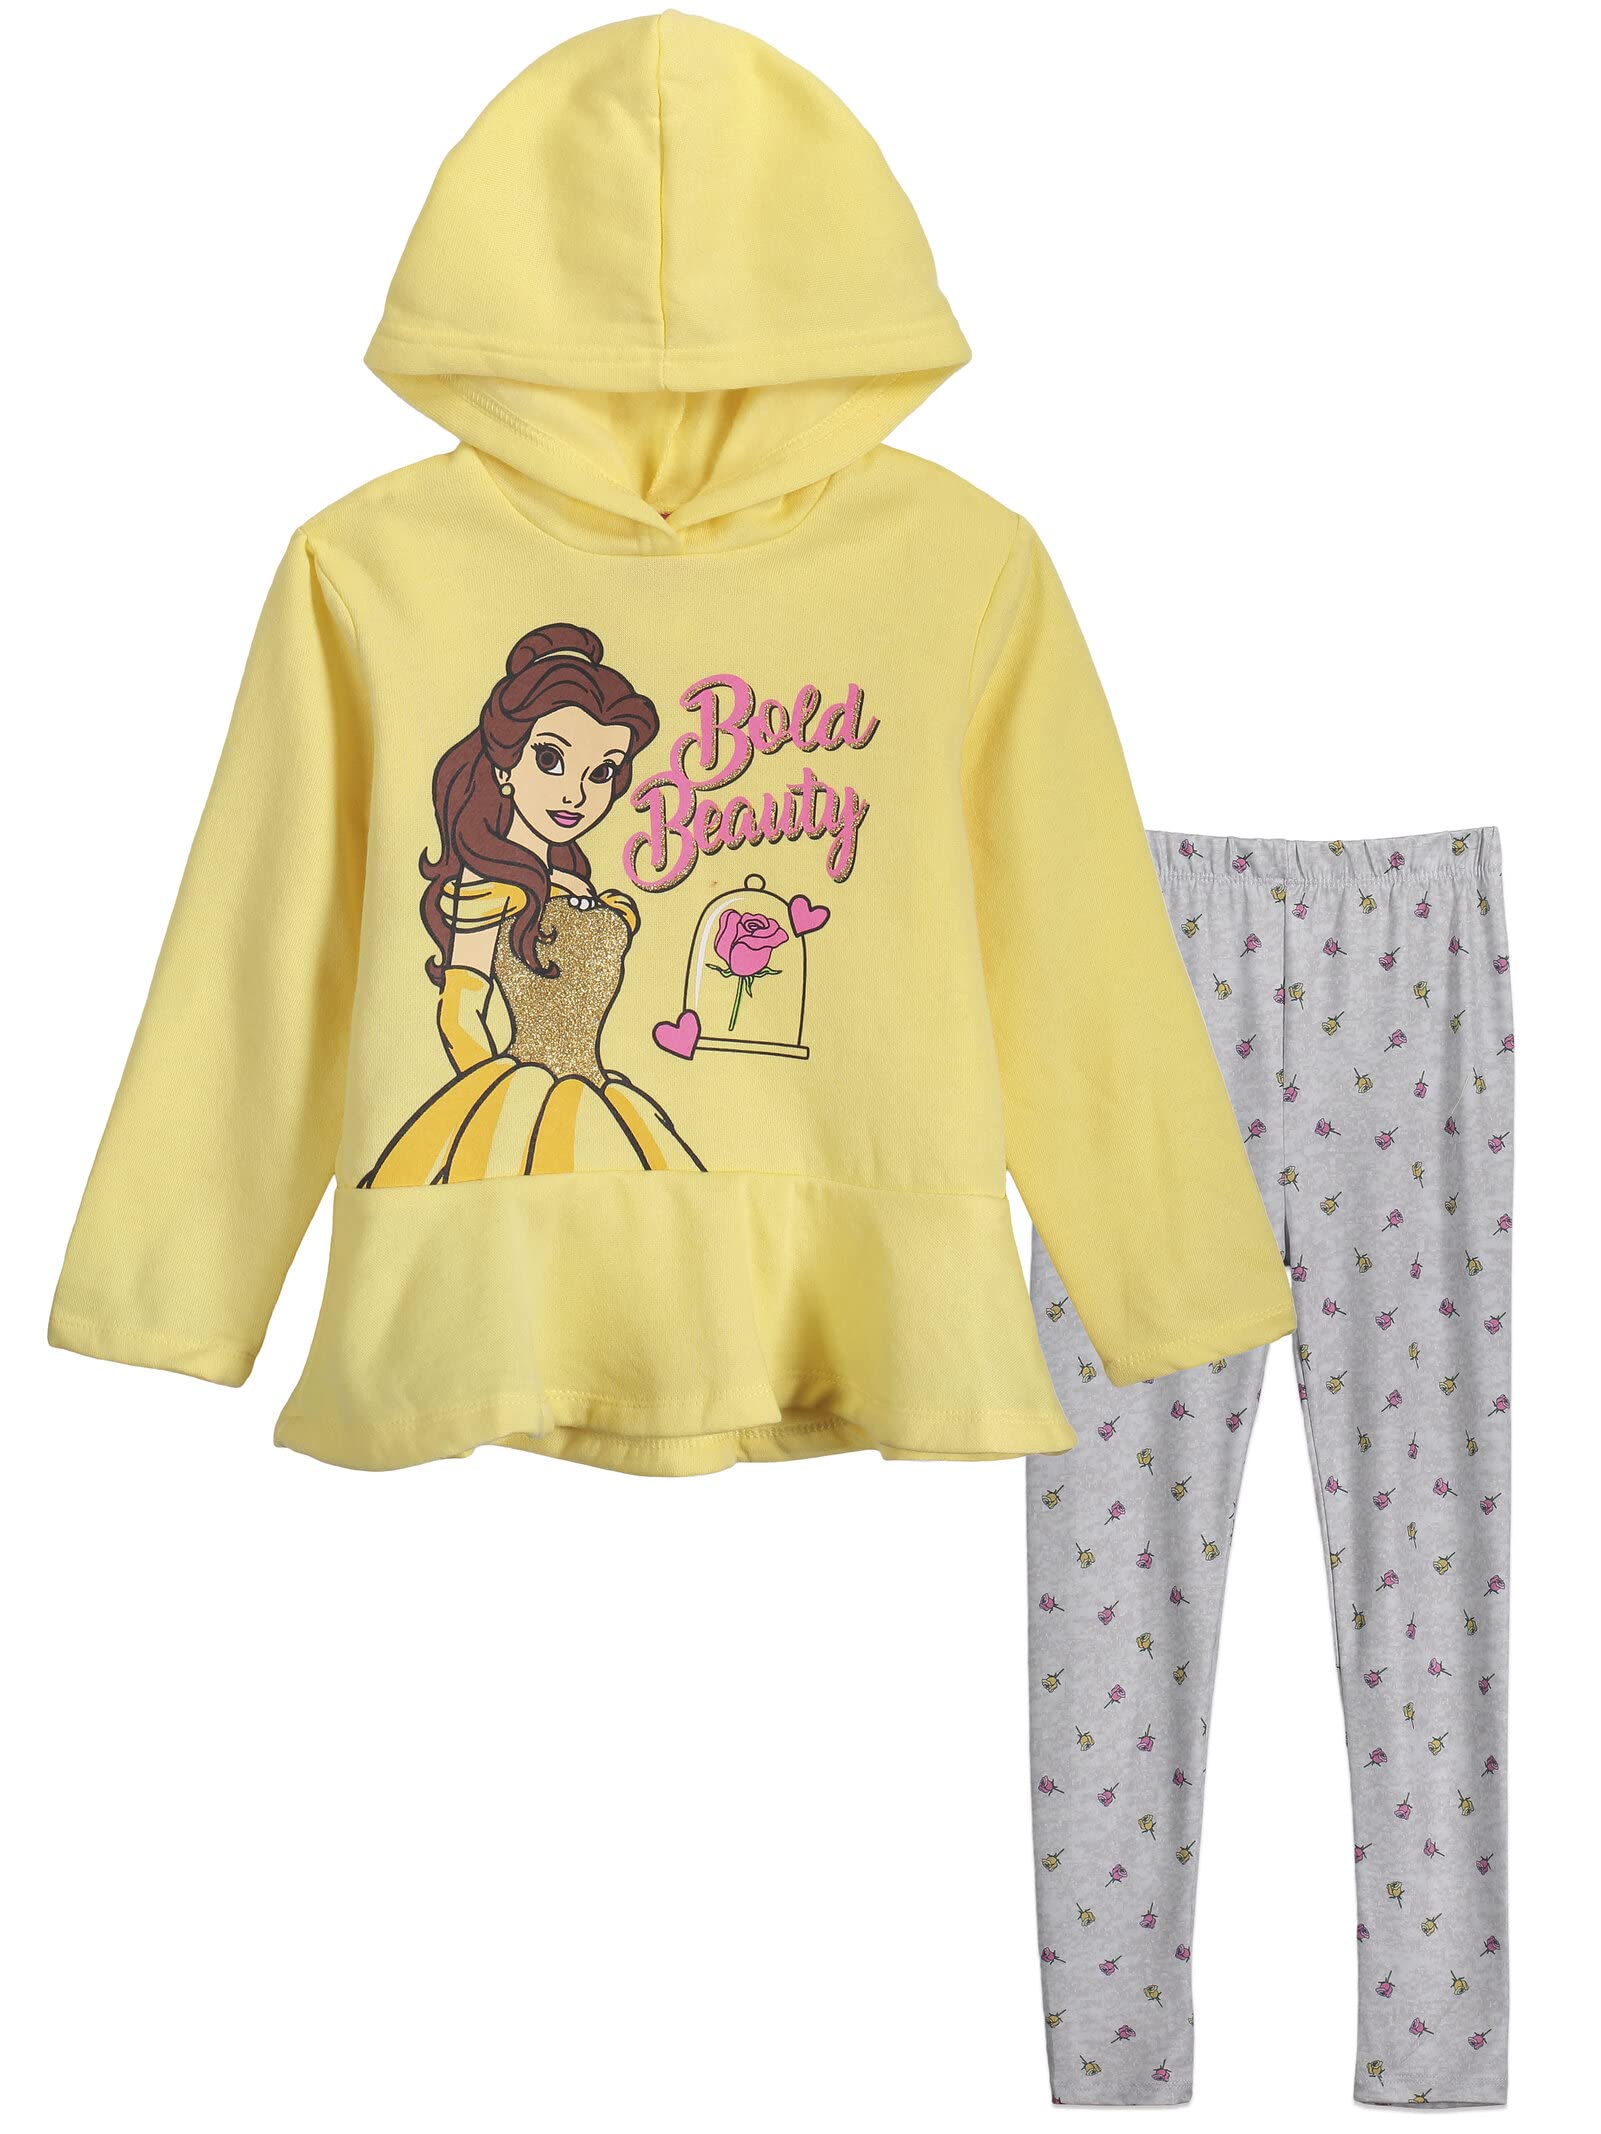 Disney Princess Belle Toddler Girls Pullover Hoodie and Leggings Outfit Set 4T